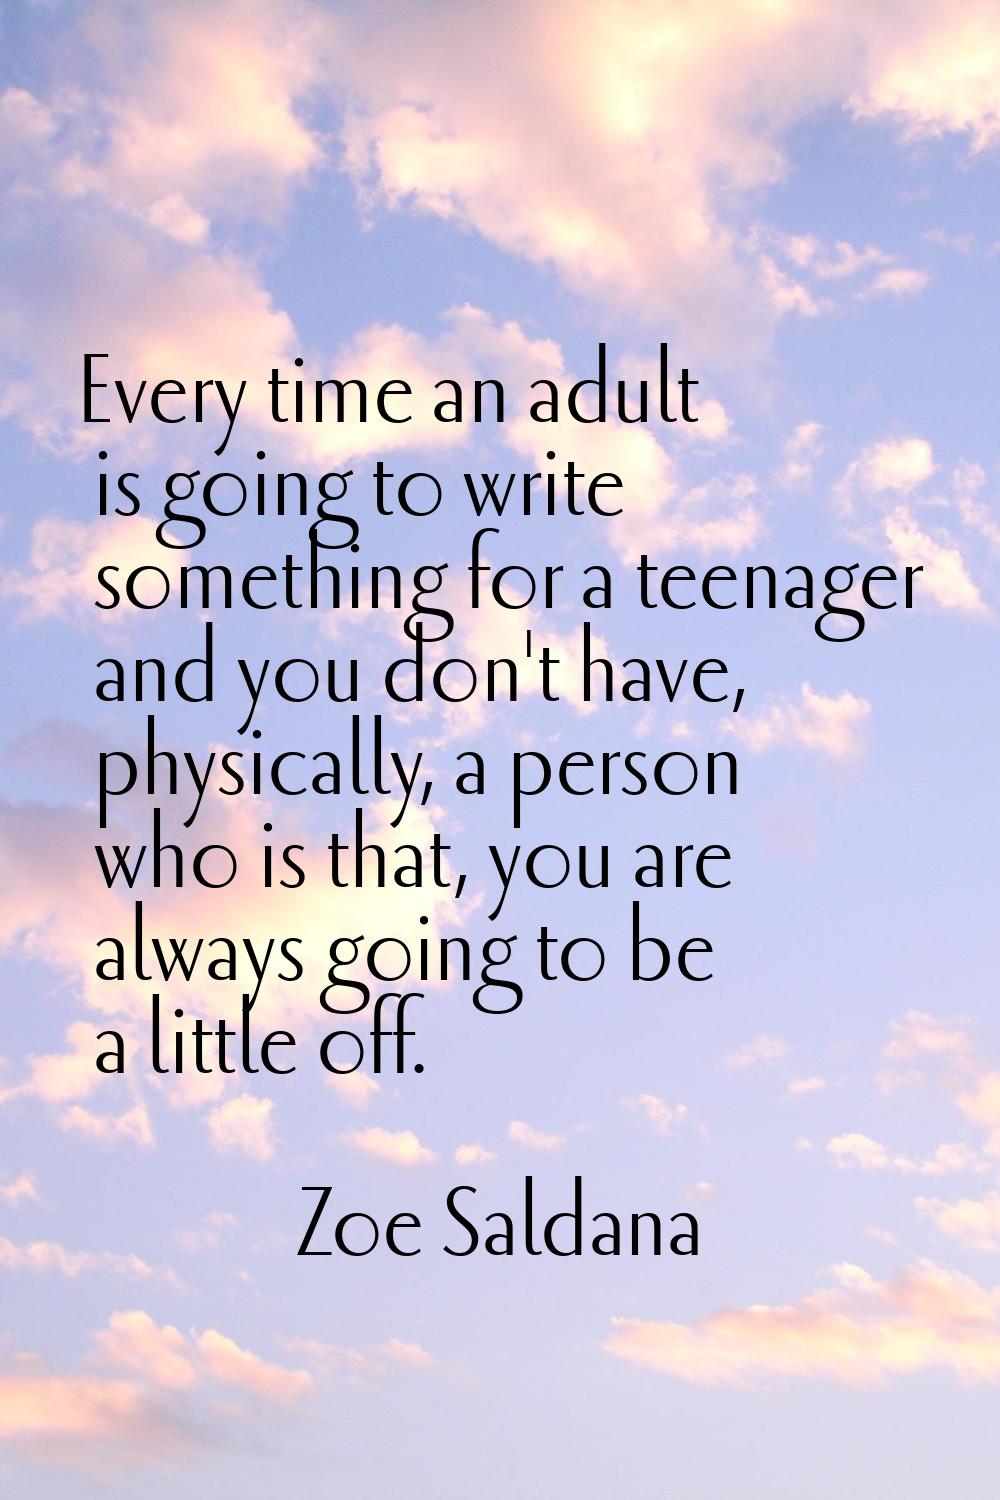 Every time an adult is going to write something for a teenager and you don't have, physically, a pe